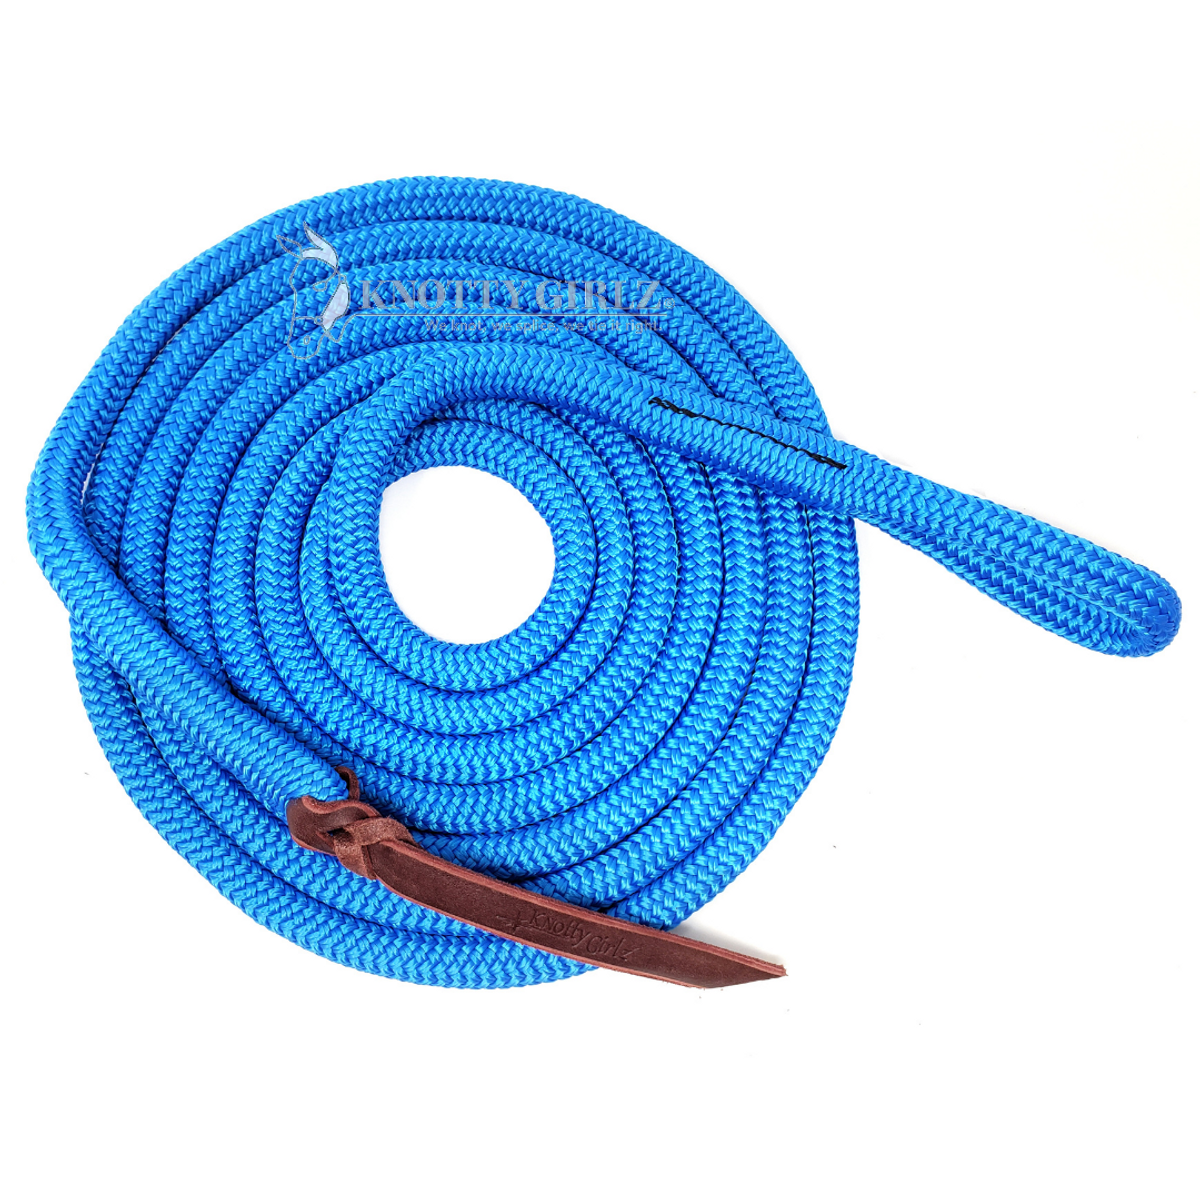 Knotty Girlz Natural Horsemanship Lead Rope made from 9/16" Double Braid Polyester Yacht Rope with eye spliced loop and leather popper,  Choices for snaps, colors and multiple lengths.  